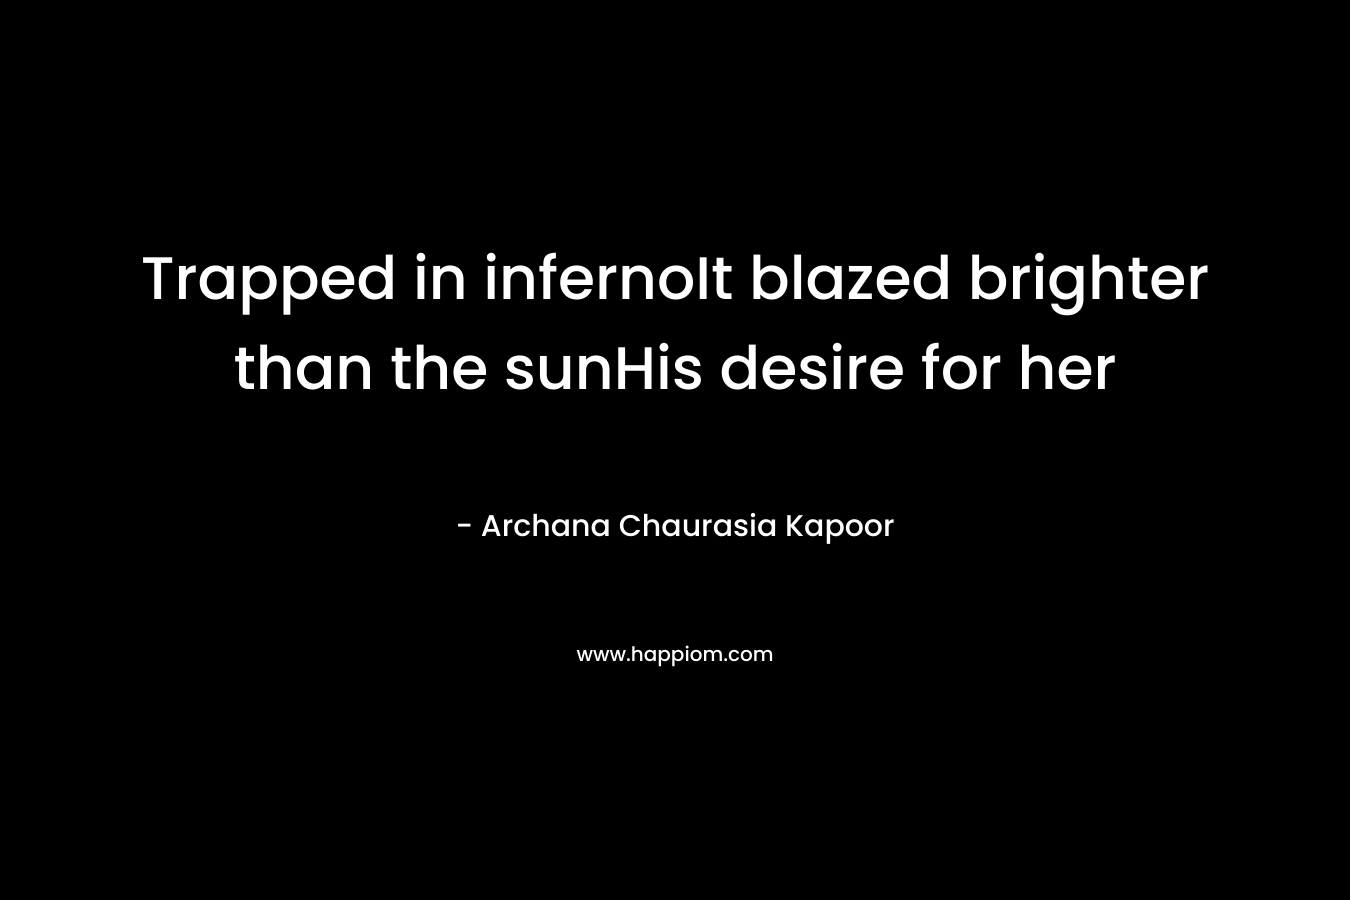 Trapped in infernoIt blazed brighter than the sunHis desire for her